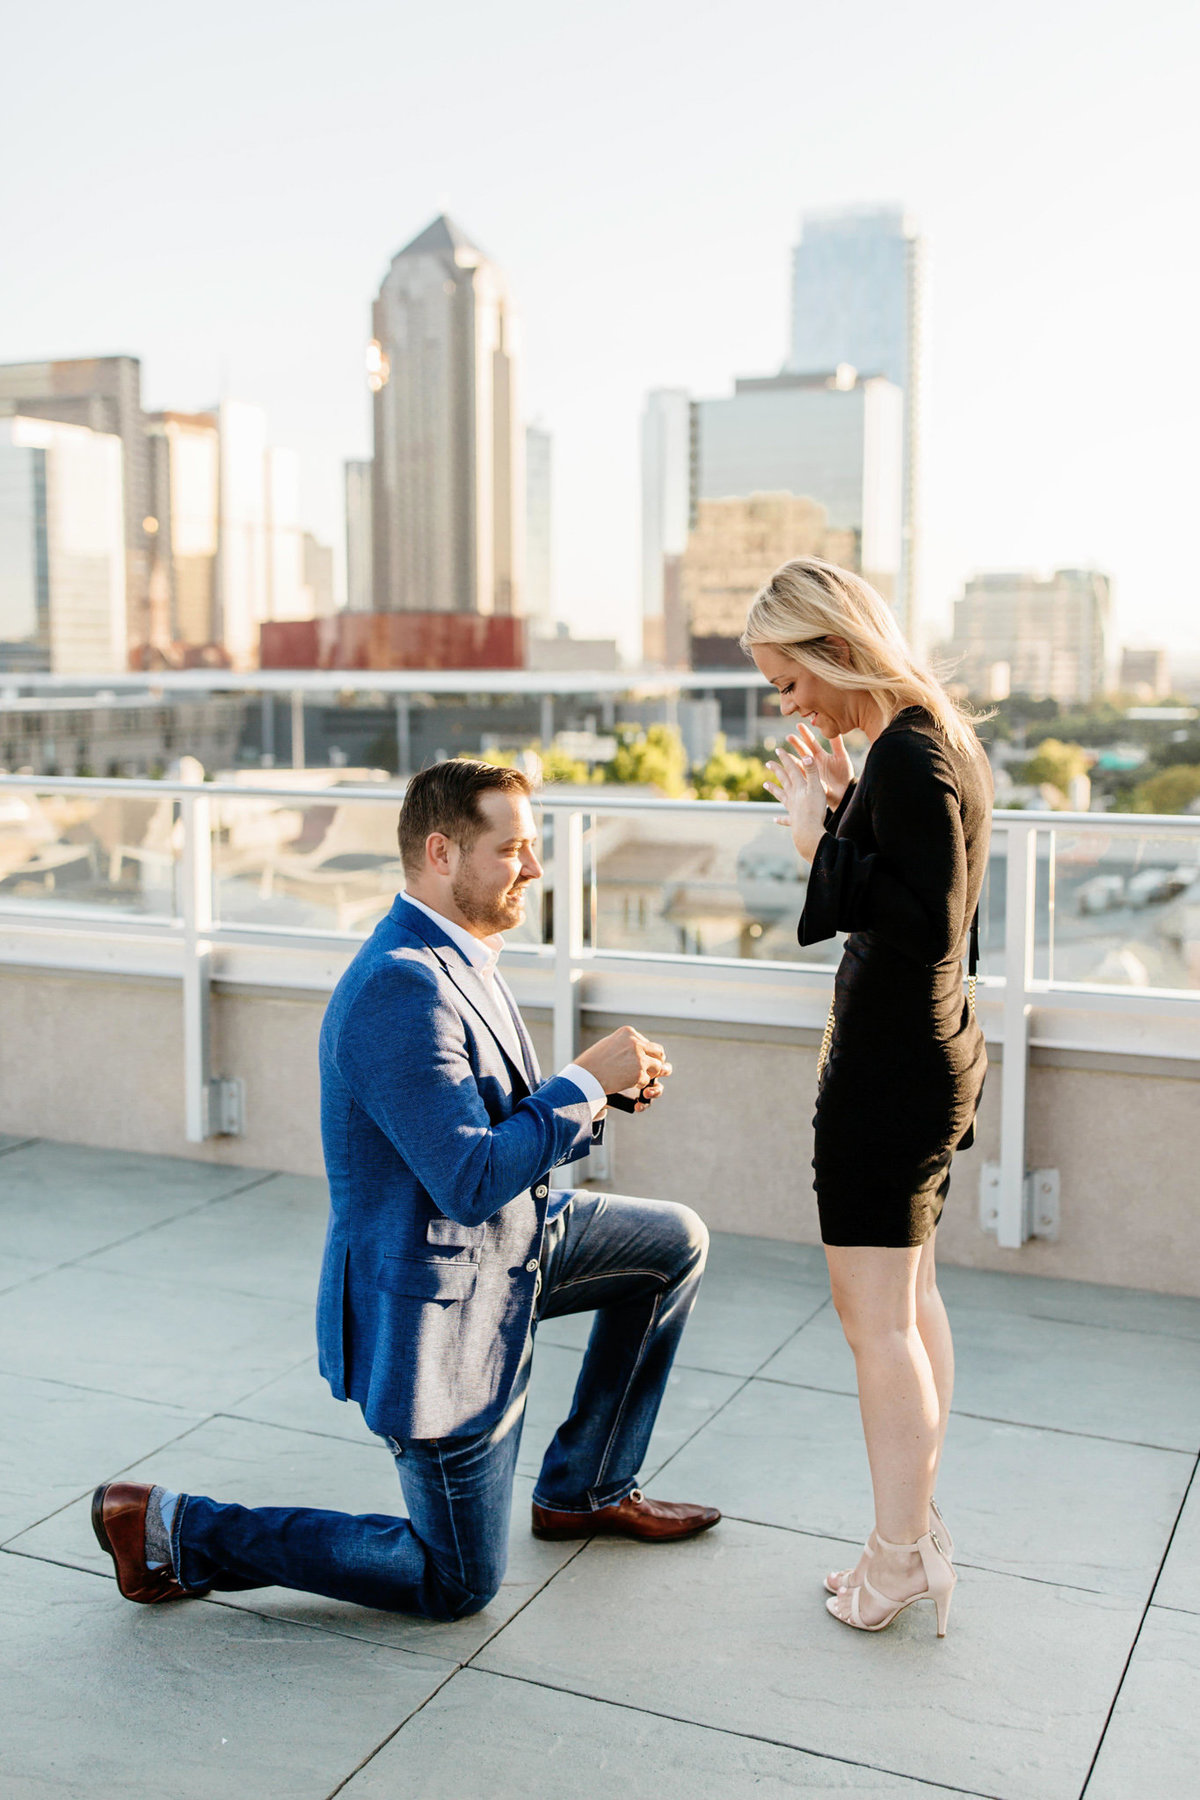 Eric & Megan - Downtown Dallas Rooftop Proposal & Engagement Session-33